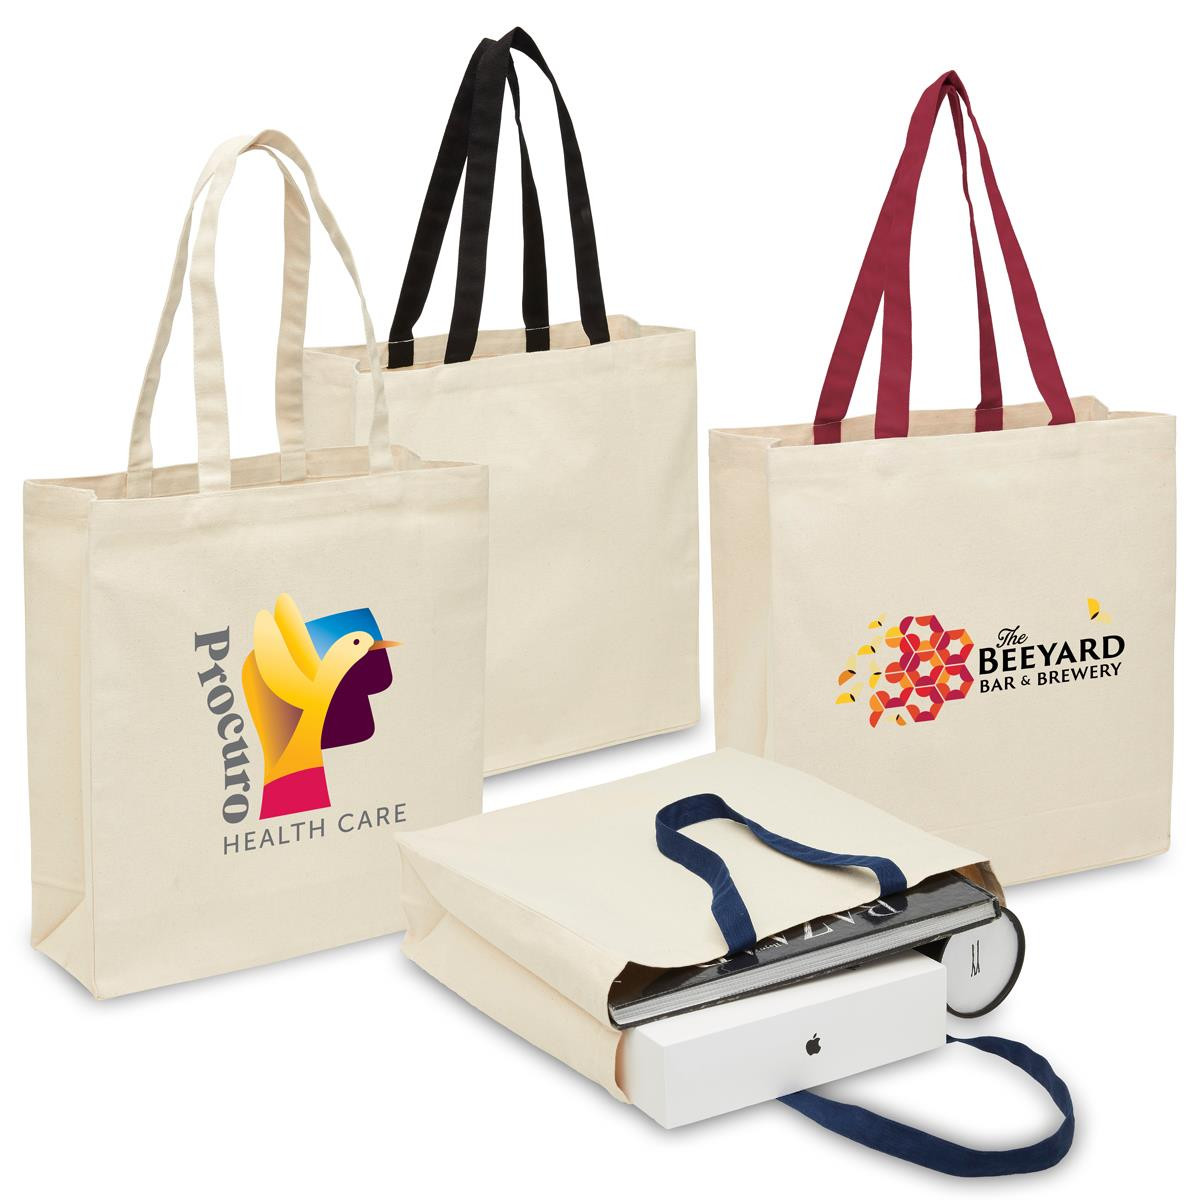 Promotional Heavy Duty Canvas Tote Bag | Custom Printed with Logos